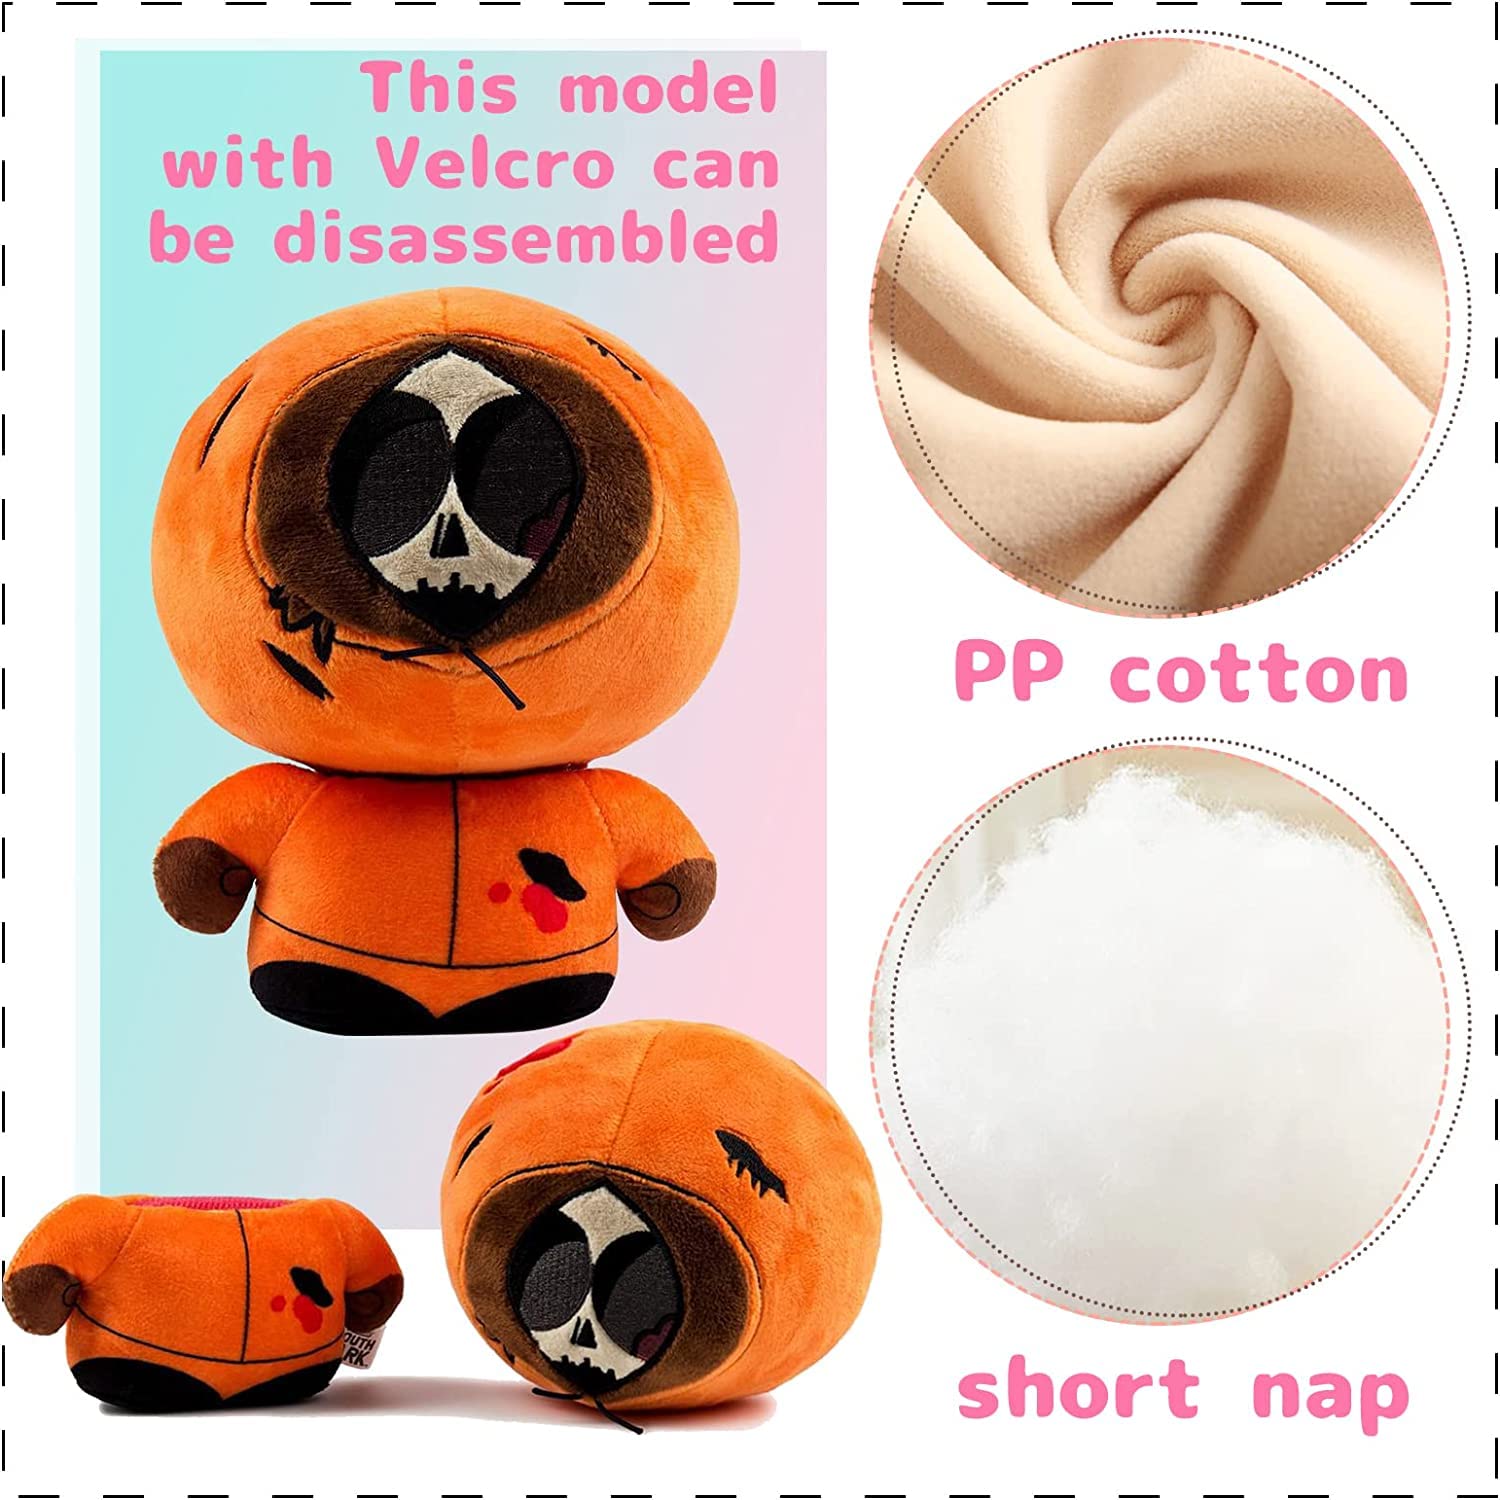 isovoc 8in Cartoon Plush Toy Game Doll Plush Figure Soft Stuffed Plushie for Kids Adults Festival Birthday Gift（6PCS）